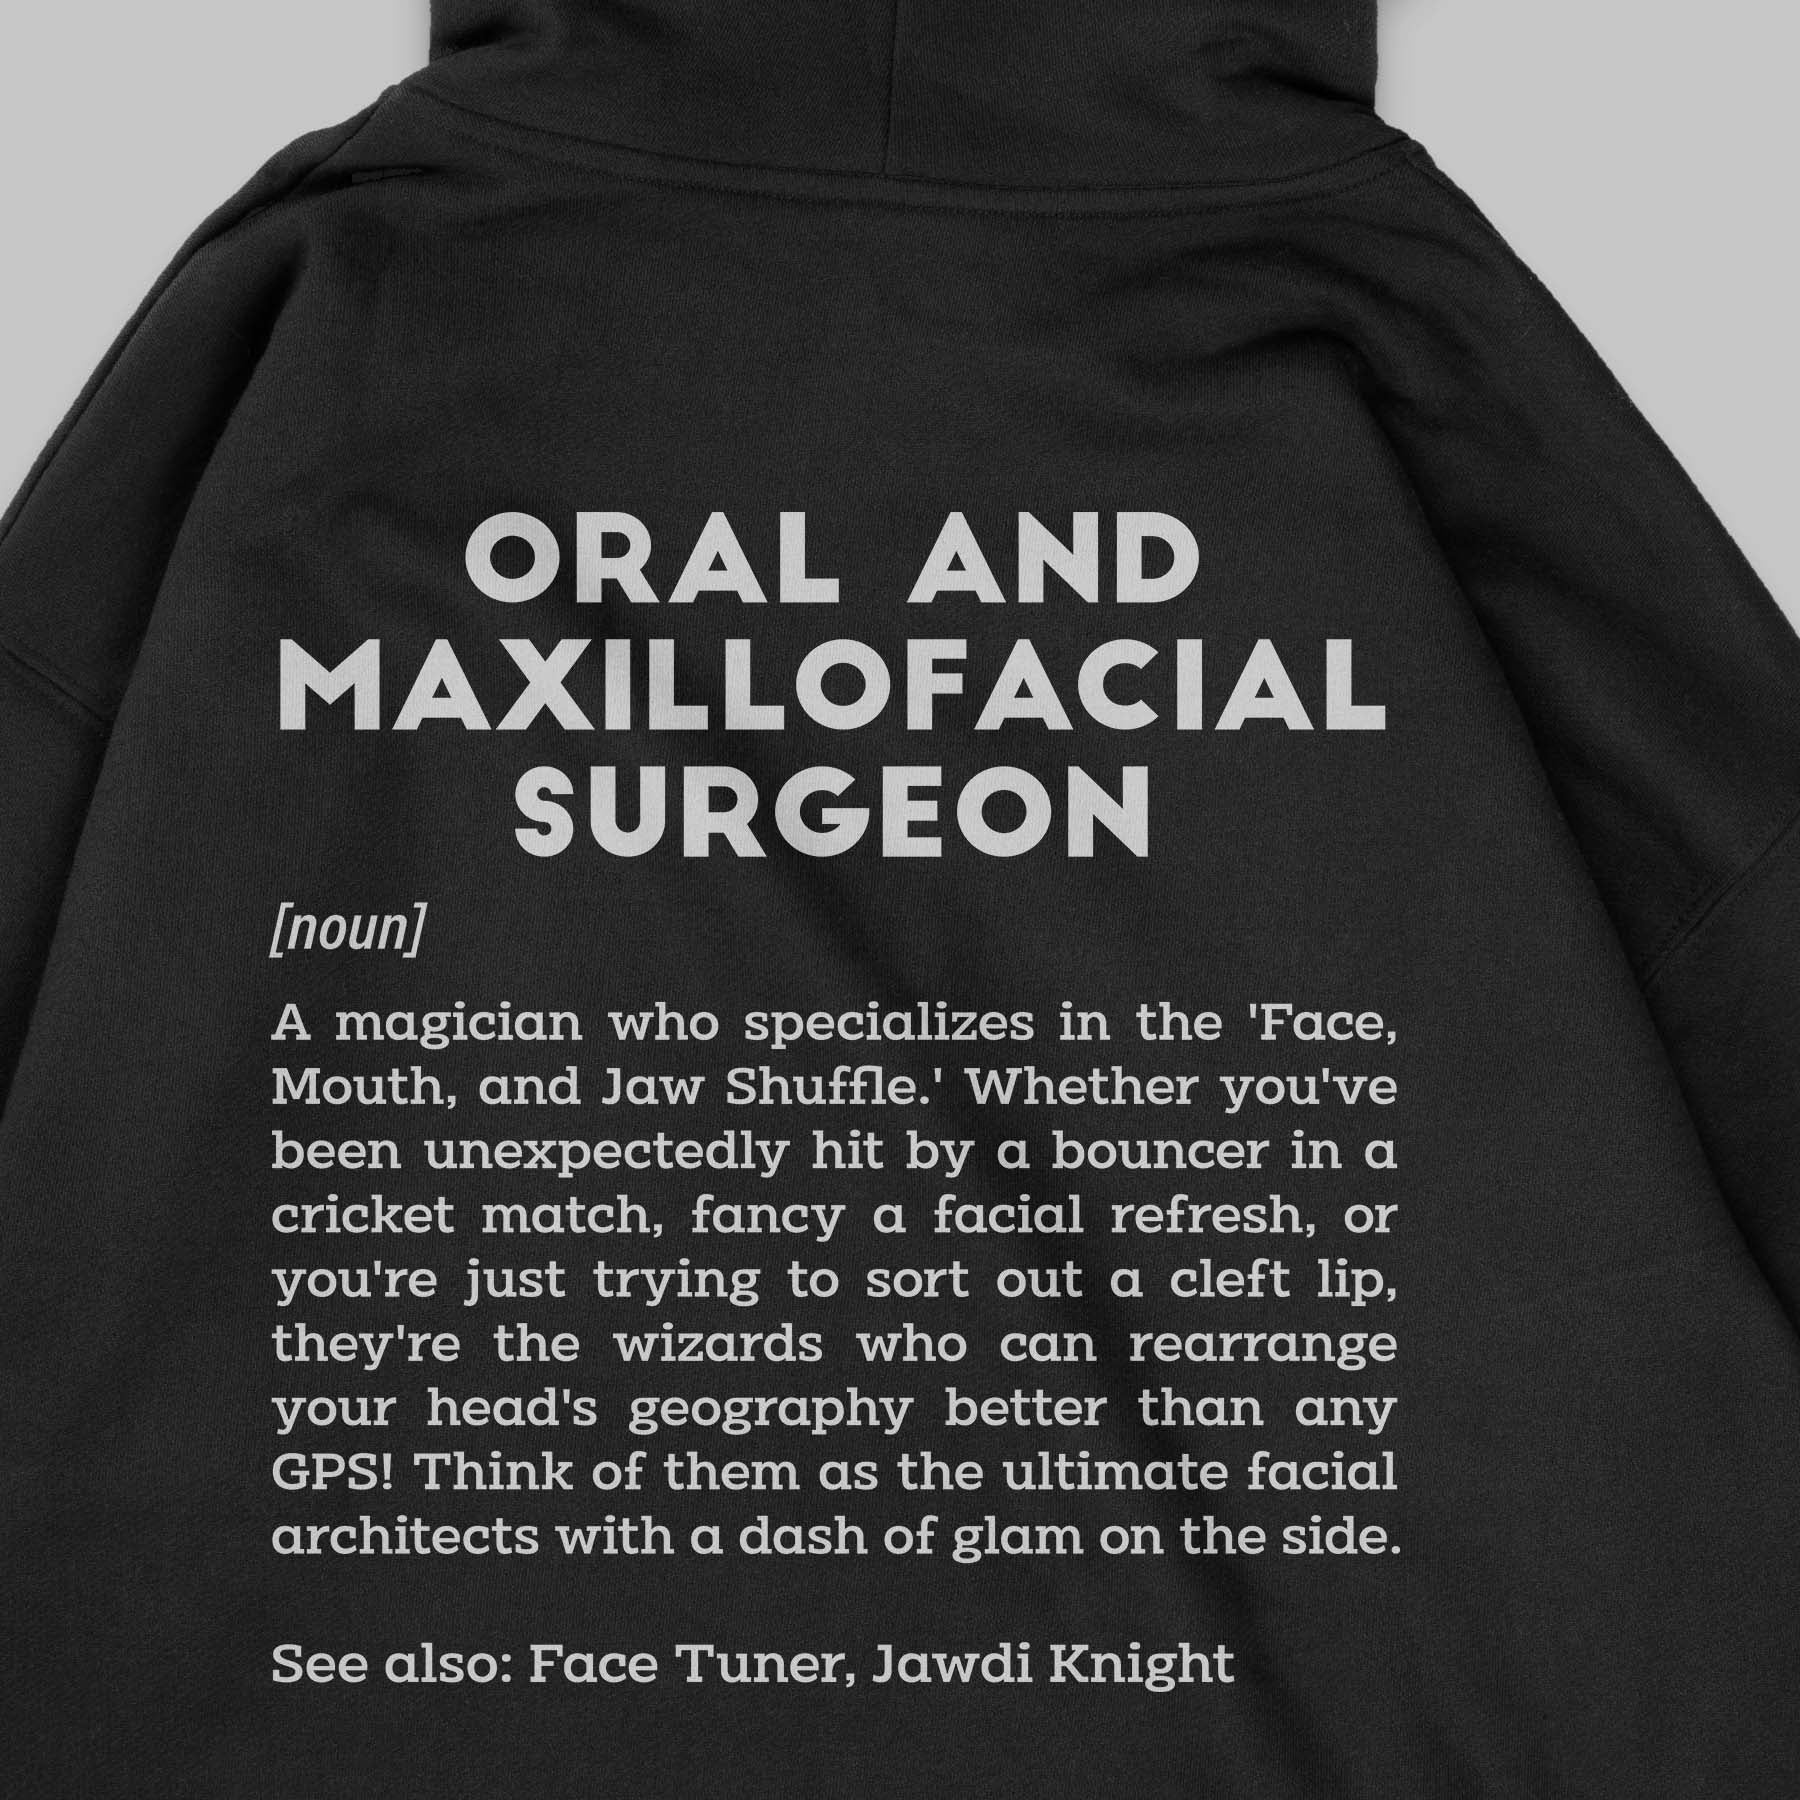 Definition Of Oral &amp; Maxillofacial Surgeon - Personalized Unisex Zip Hoodie